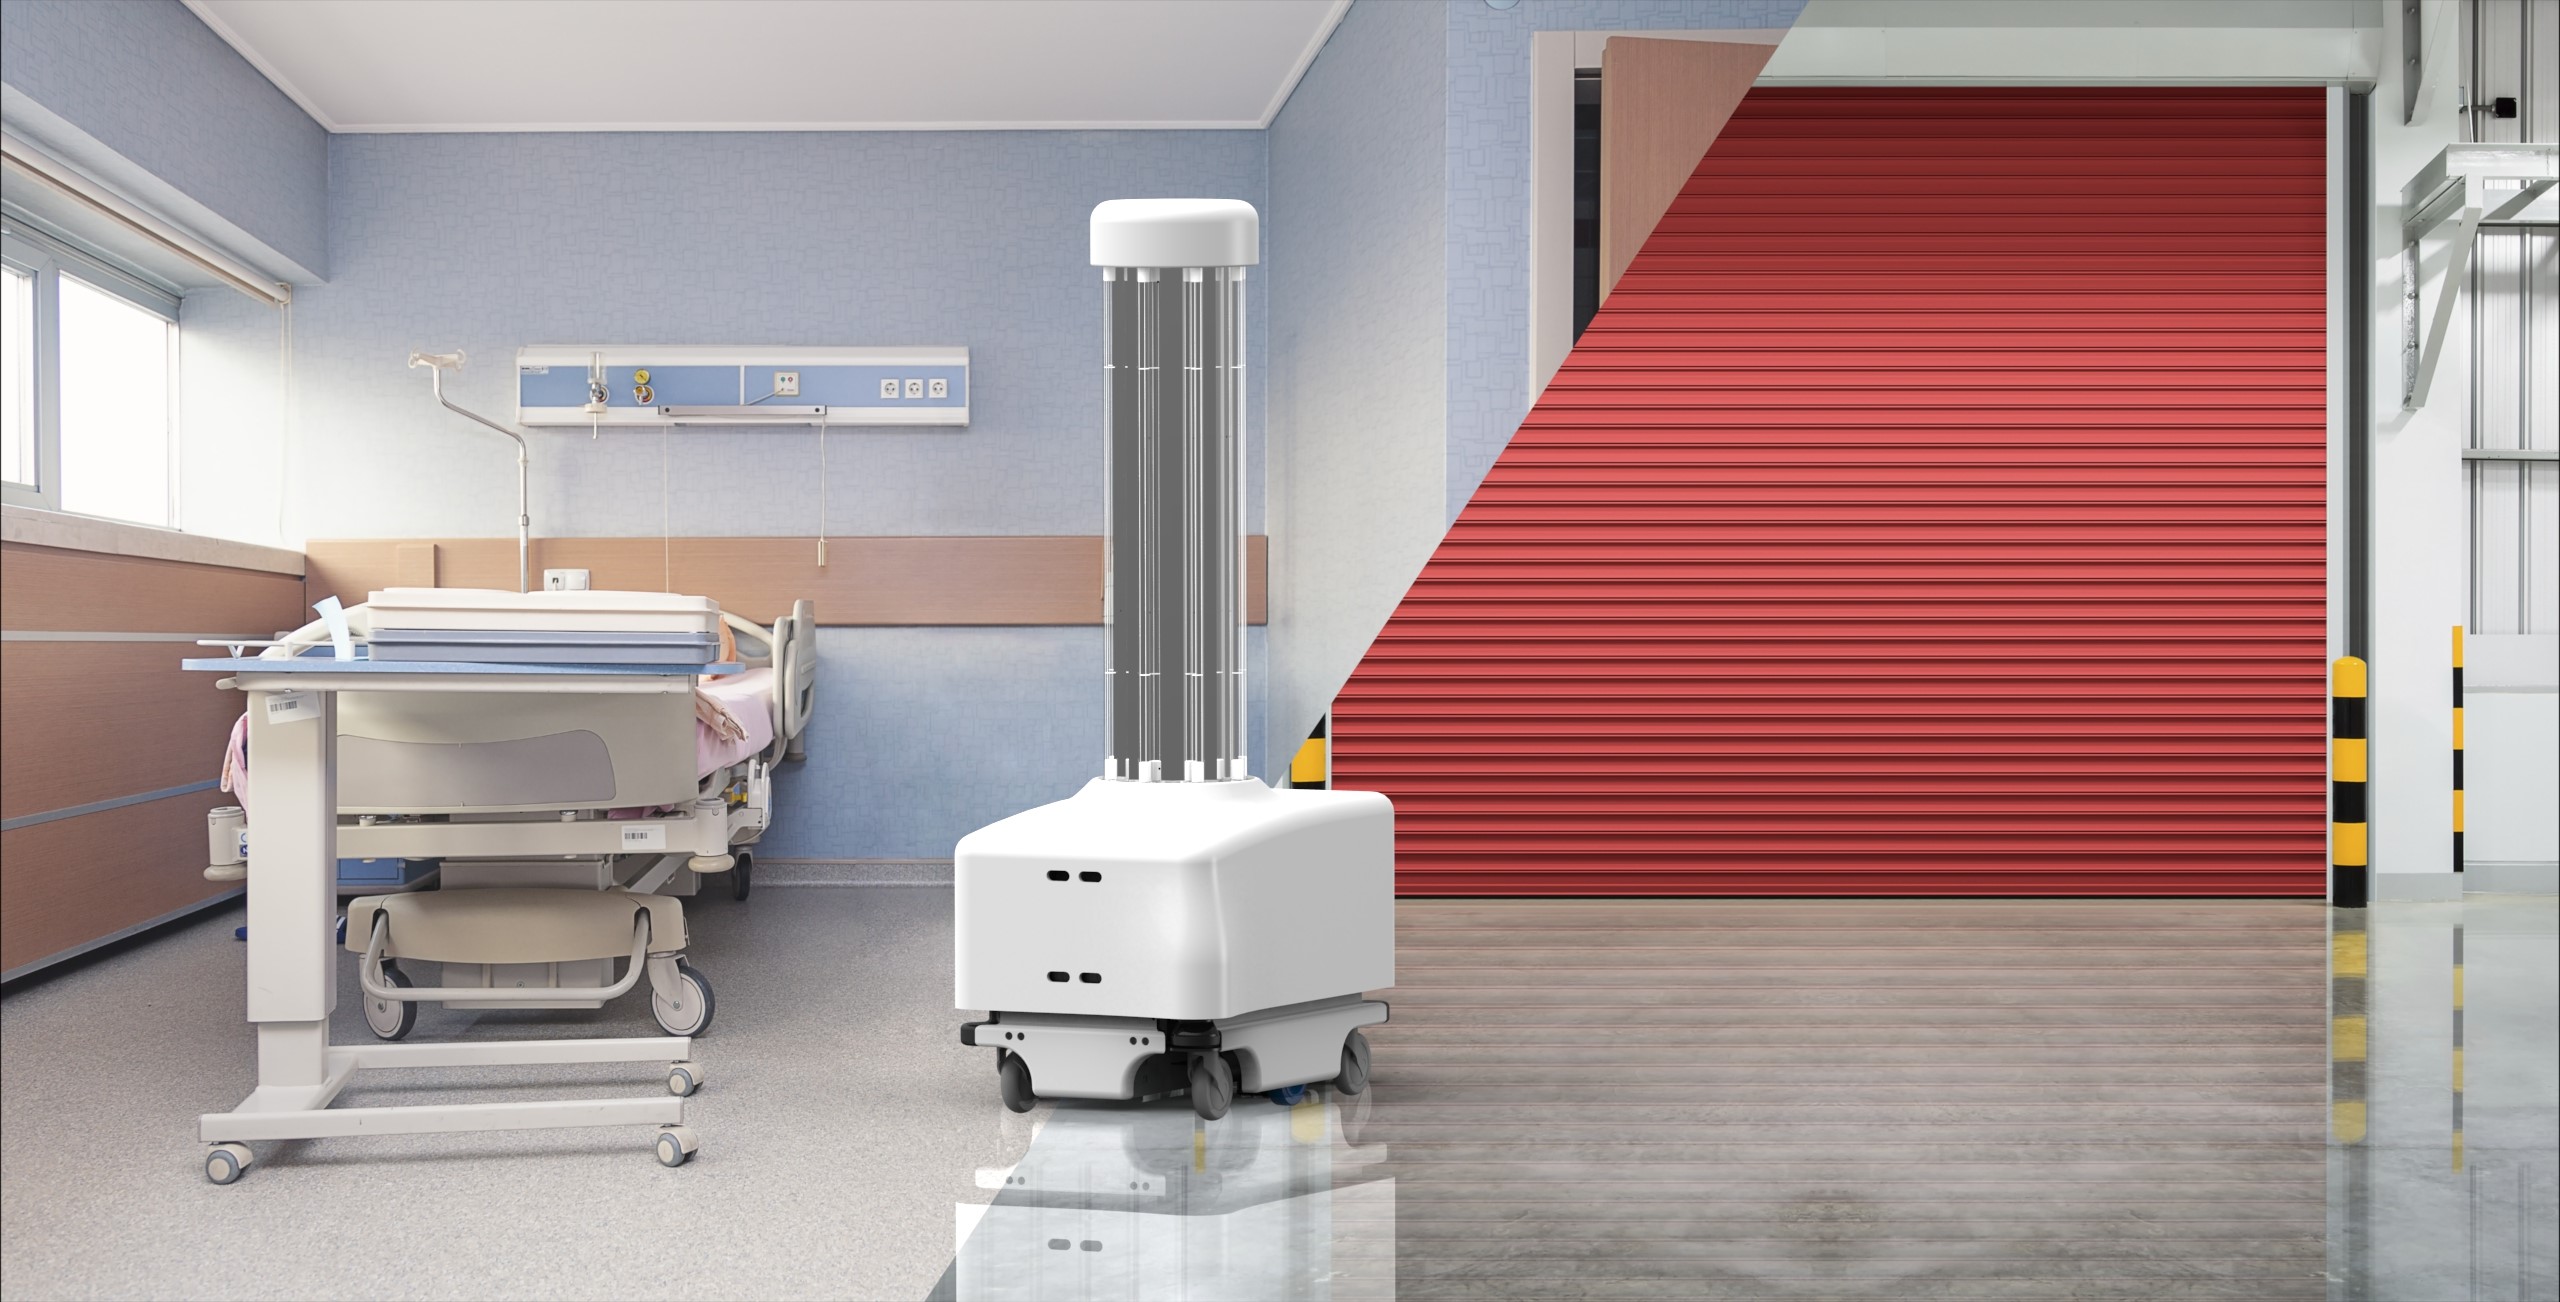 The UV-Disinfection Robot is a disinfection robot for hospitals and manufacturing, to be used with the aim of reducing infection rates of hospital-acquired infections (HAIs) and microorganisms in production. The UV-DR has a kill rate of 99.9% and moves autonomously and safely around facilities. (Image credit: Blue Ocean Robotics)